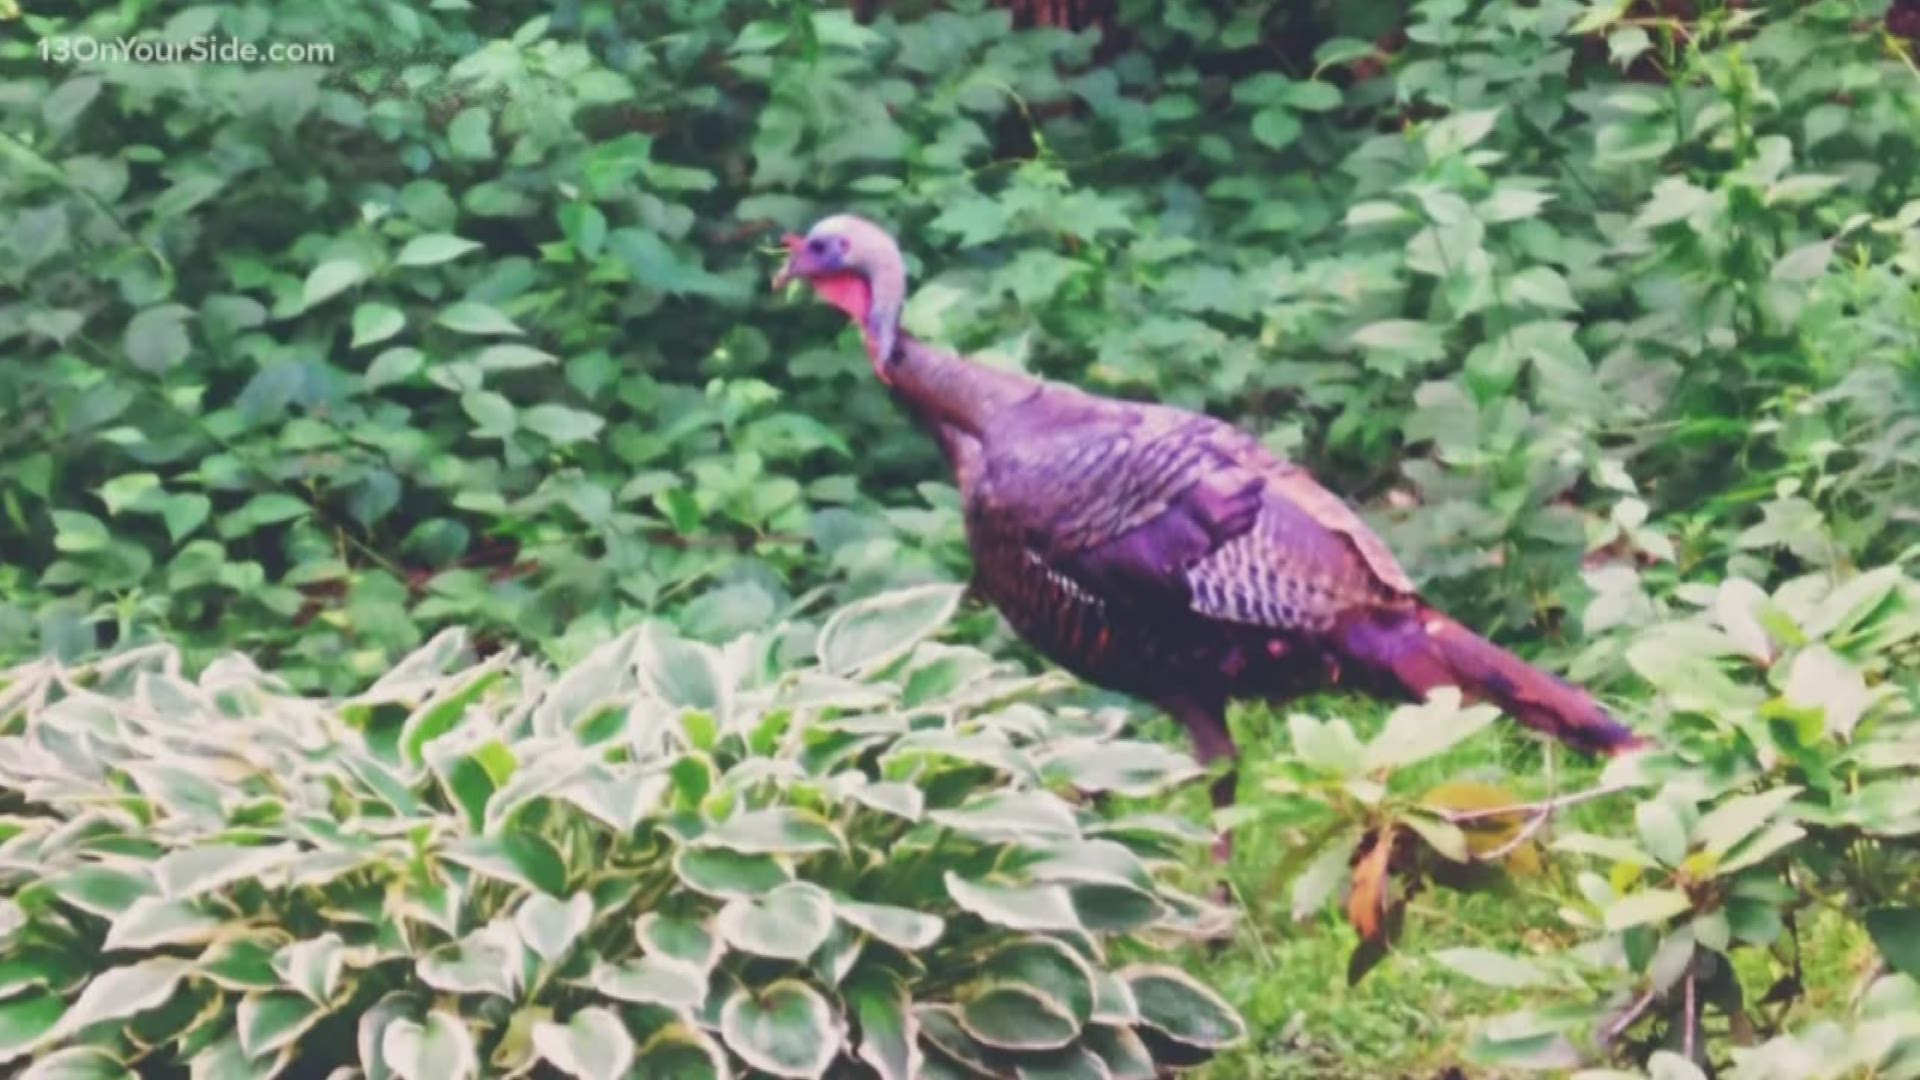 Wild turkey ran over and clubbed near Holland